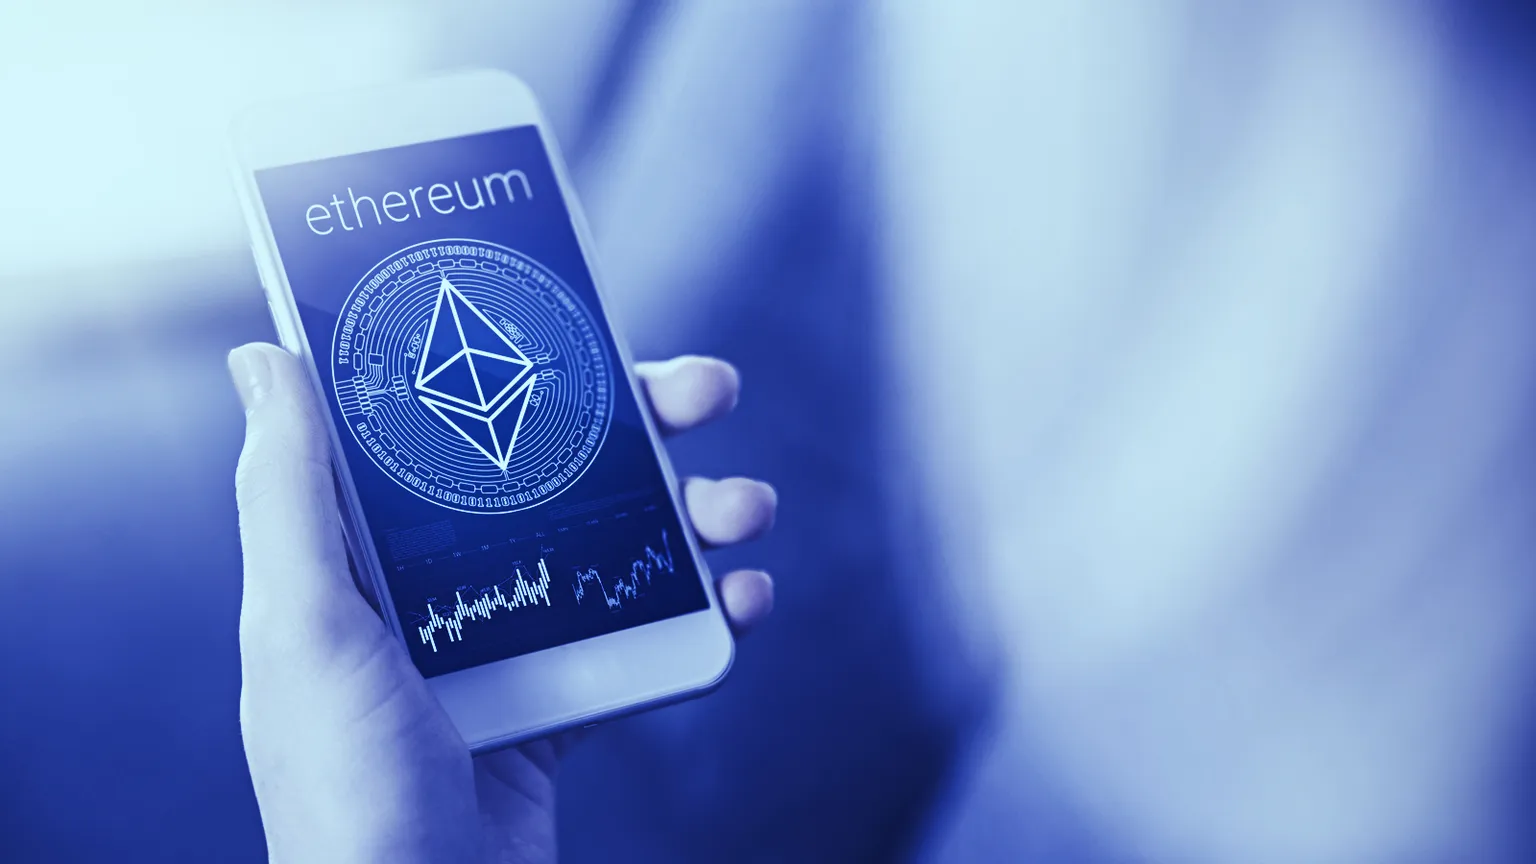 Ethereum holders are likely to spend small. Image: Shutterstock